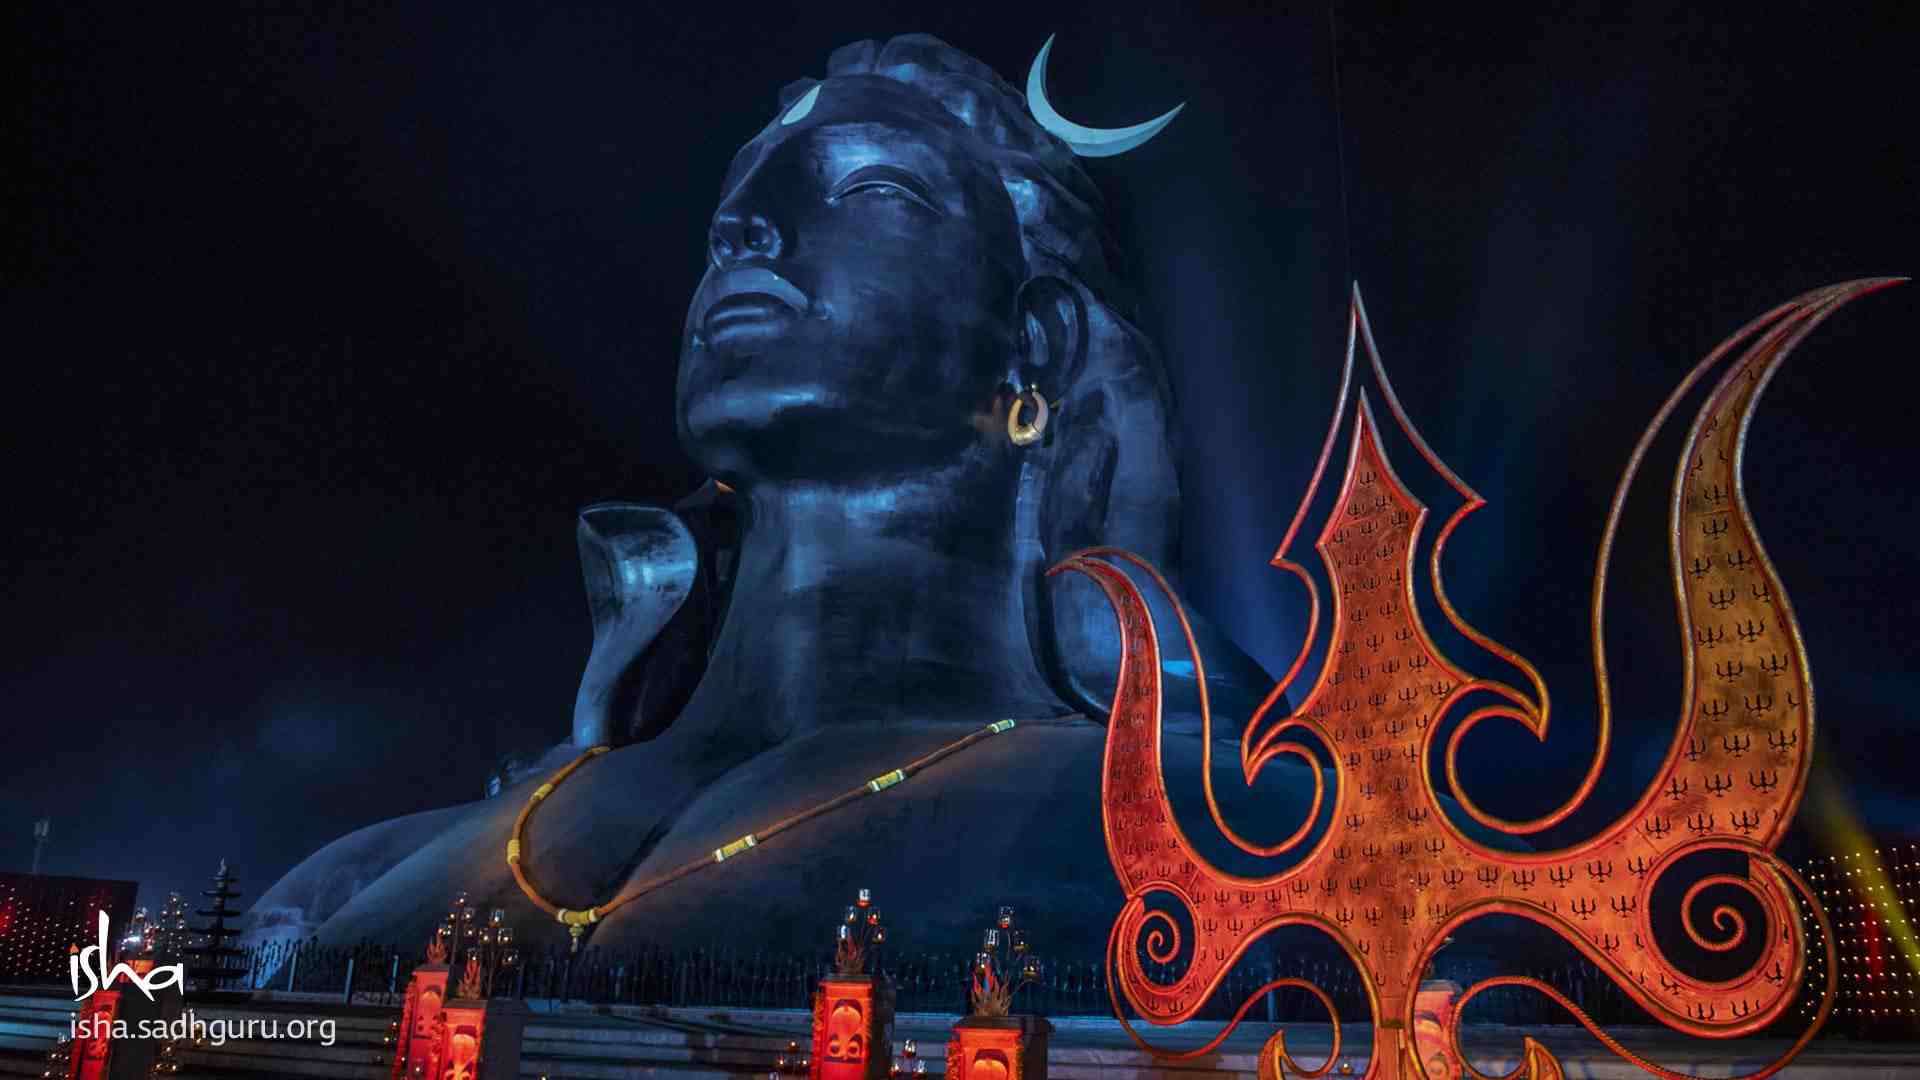 Lord Shiva Amoled Wallpapers - Wallpaper Cave